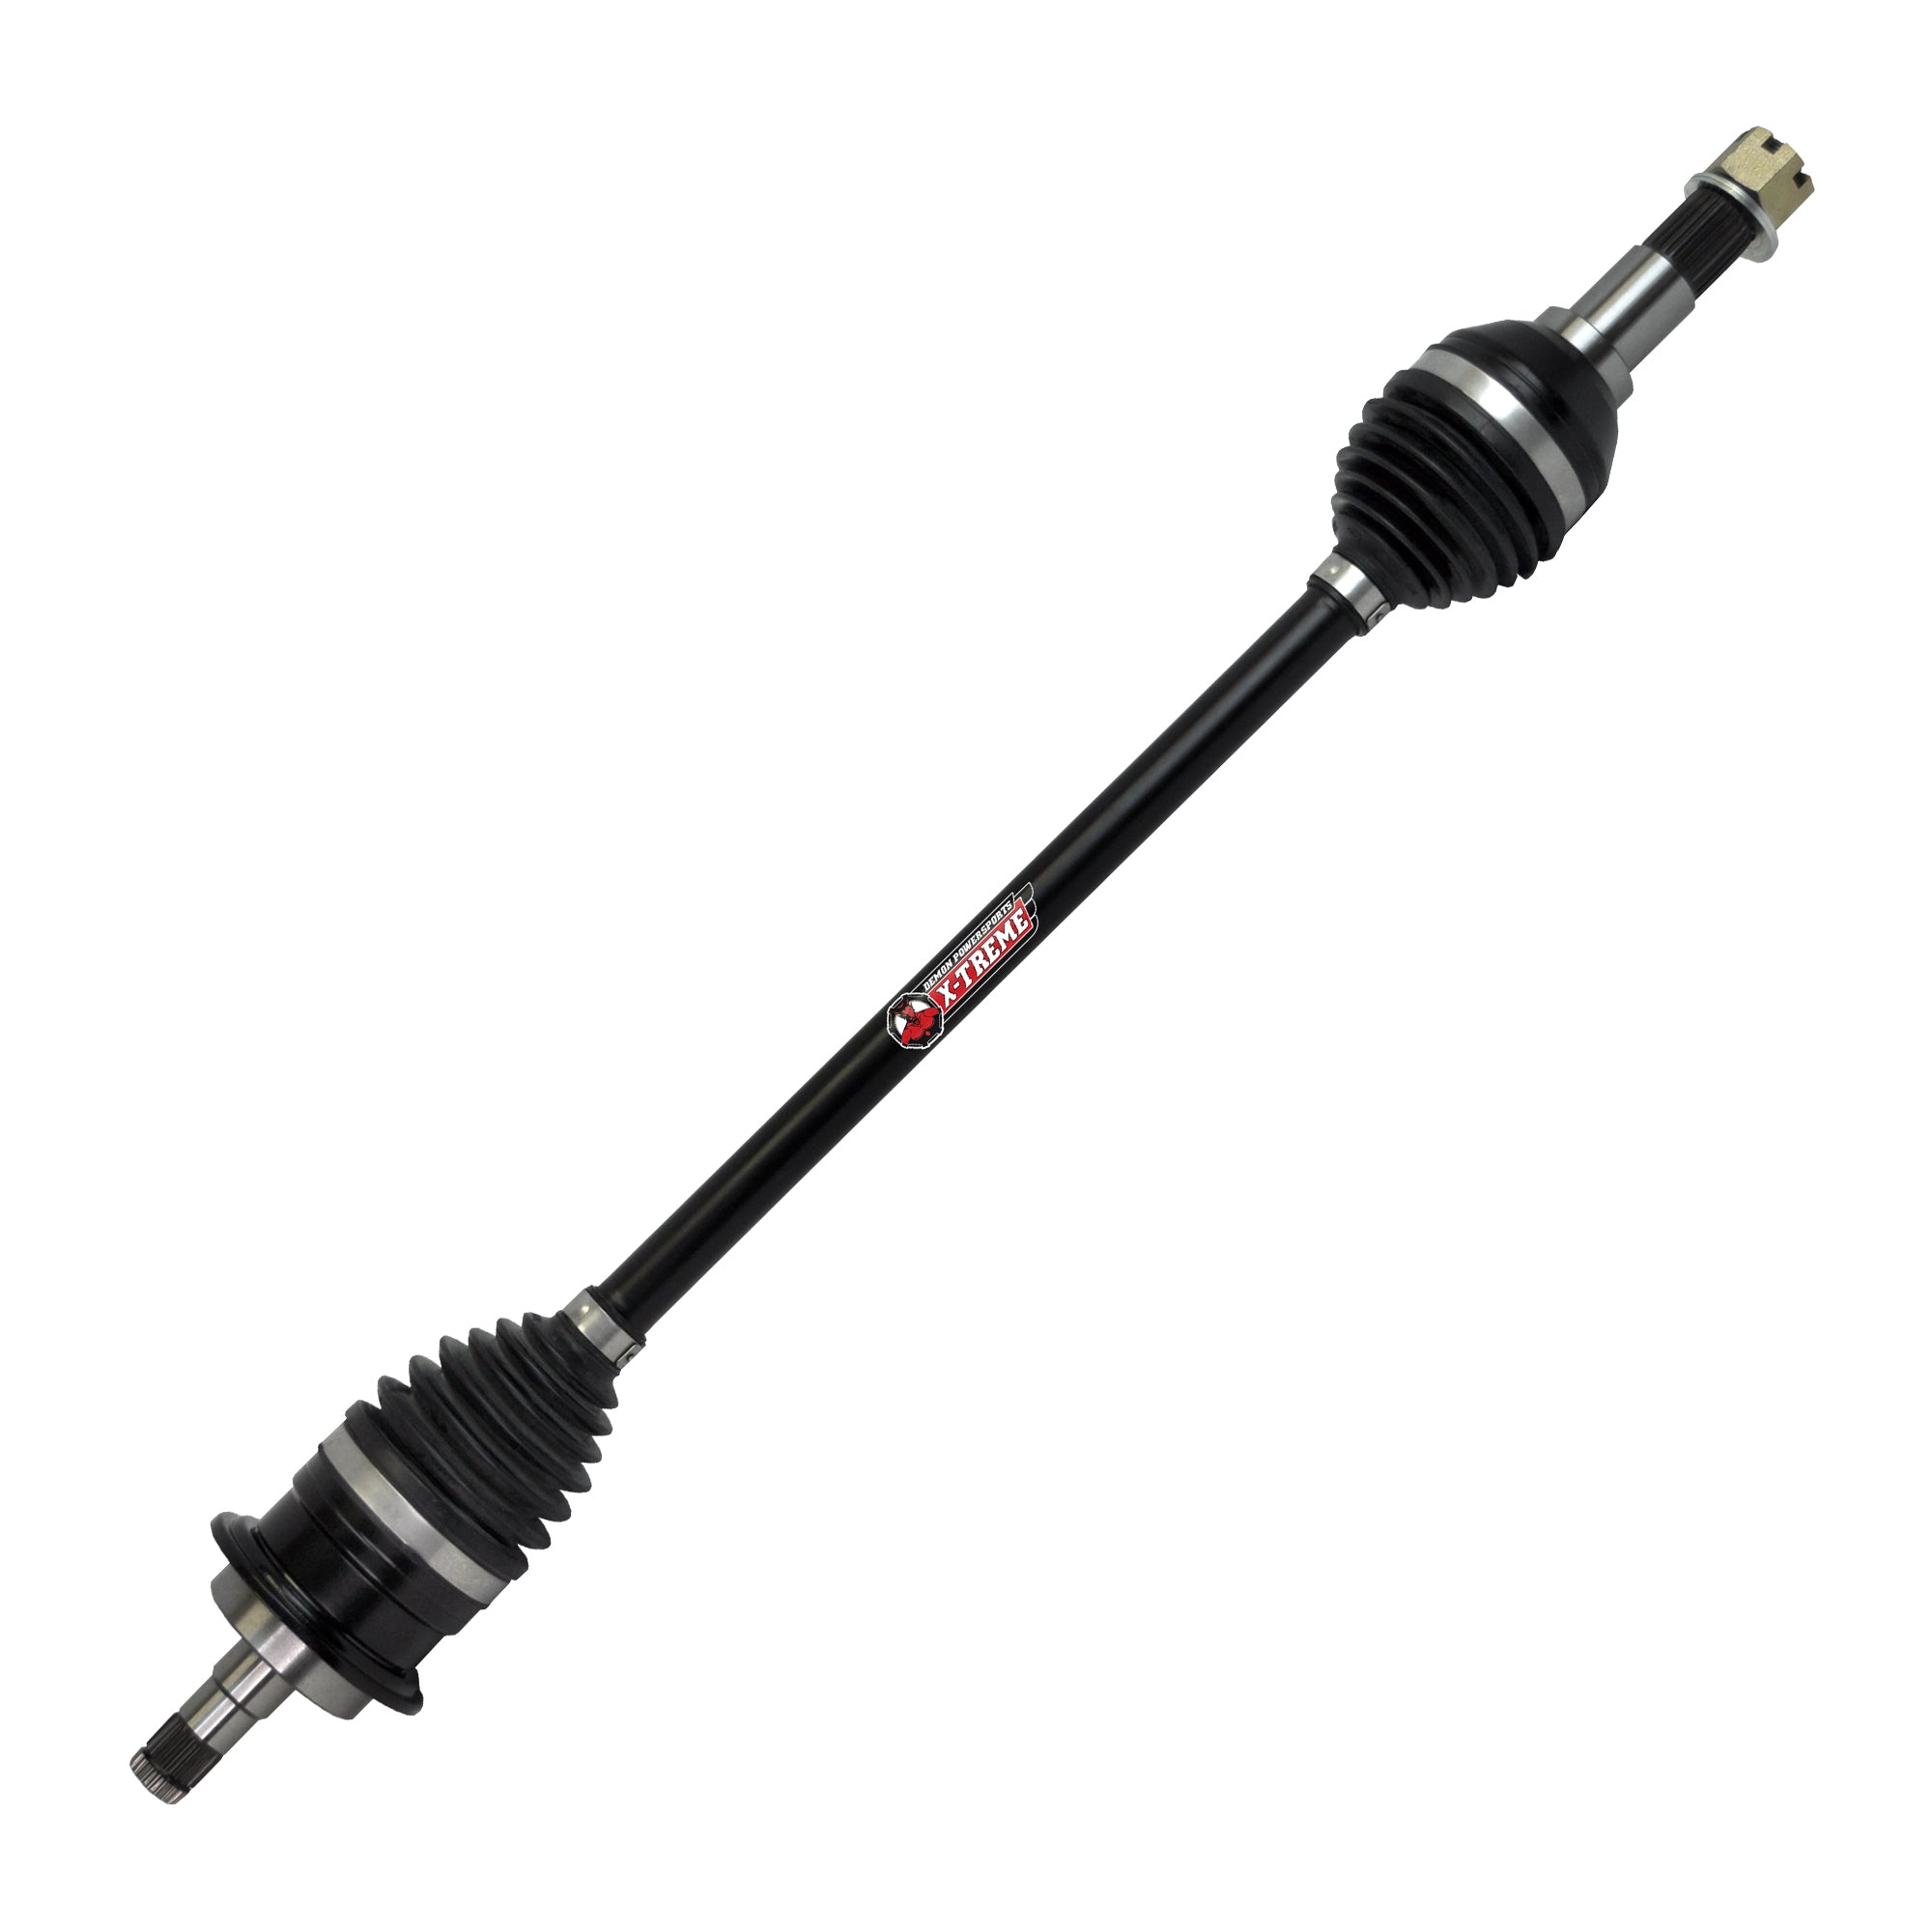 Performance Axle for Can Am Maverick 1000 — Demon Powersports